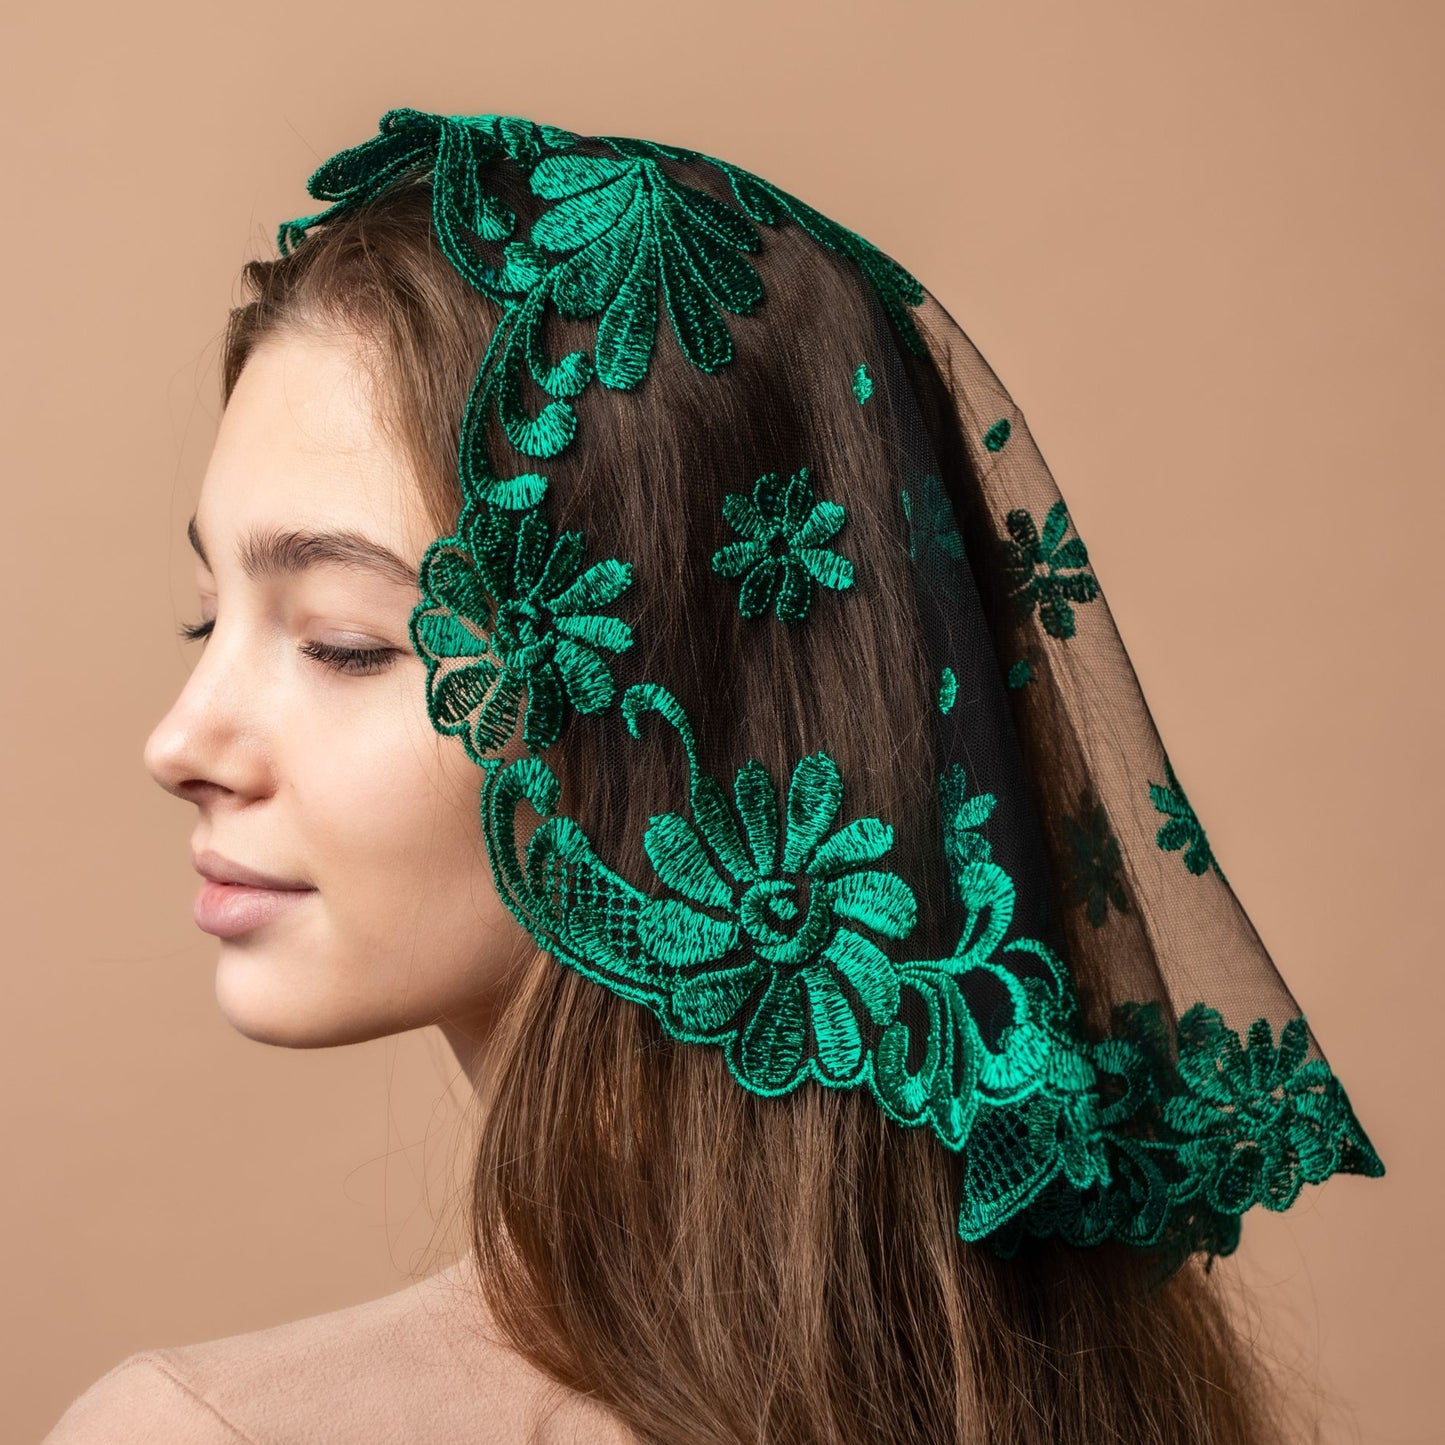 NEW!! Bestseller veil in new green color - MariaVeils